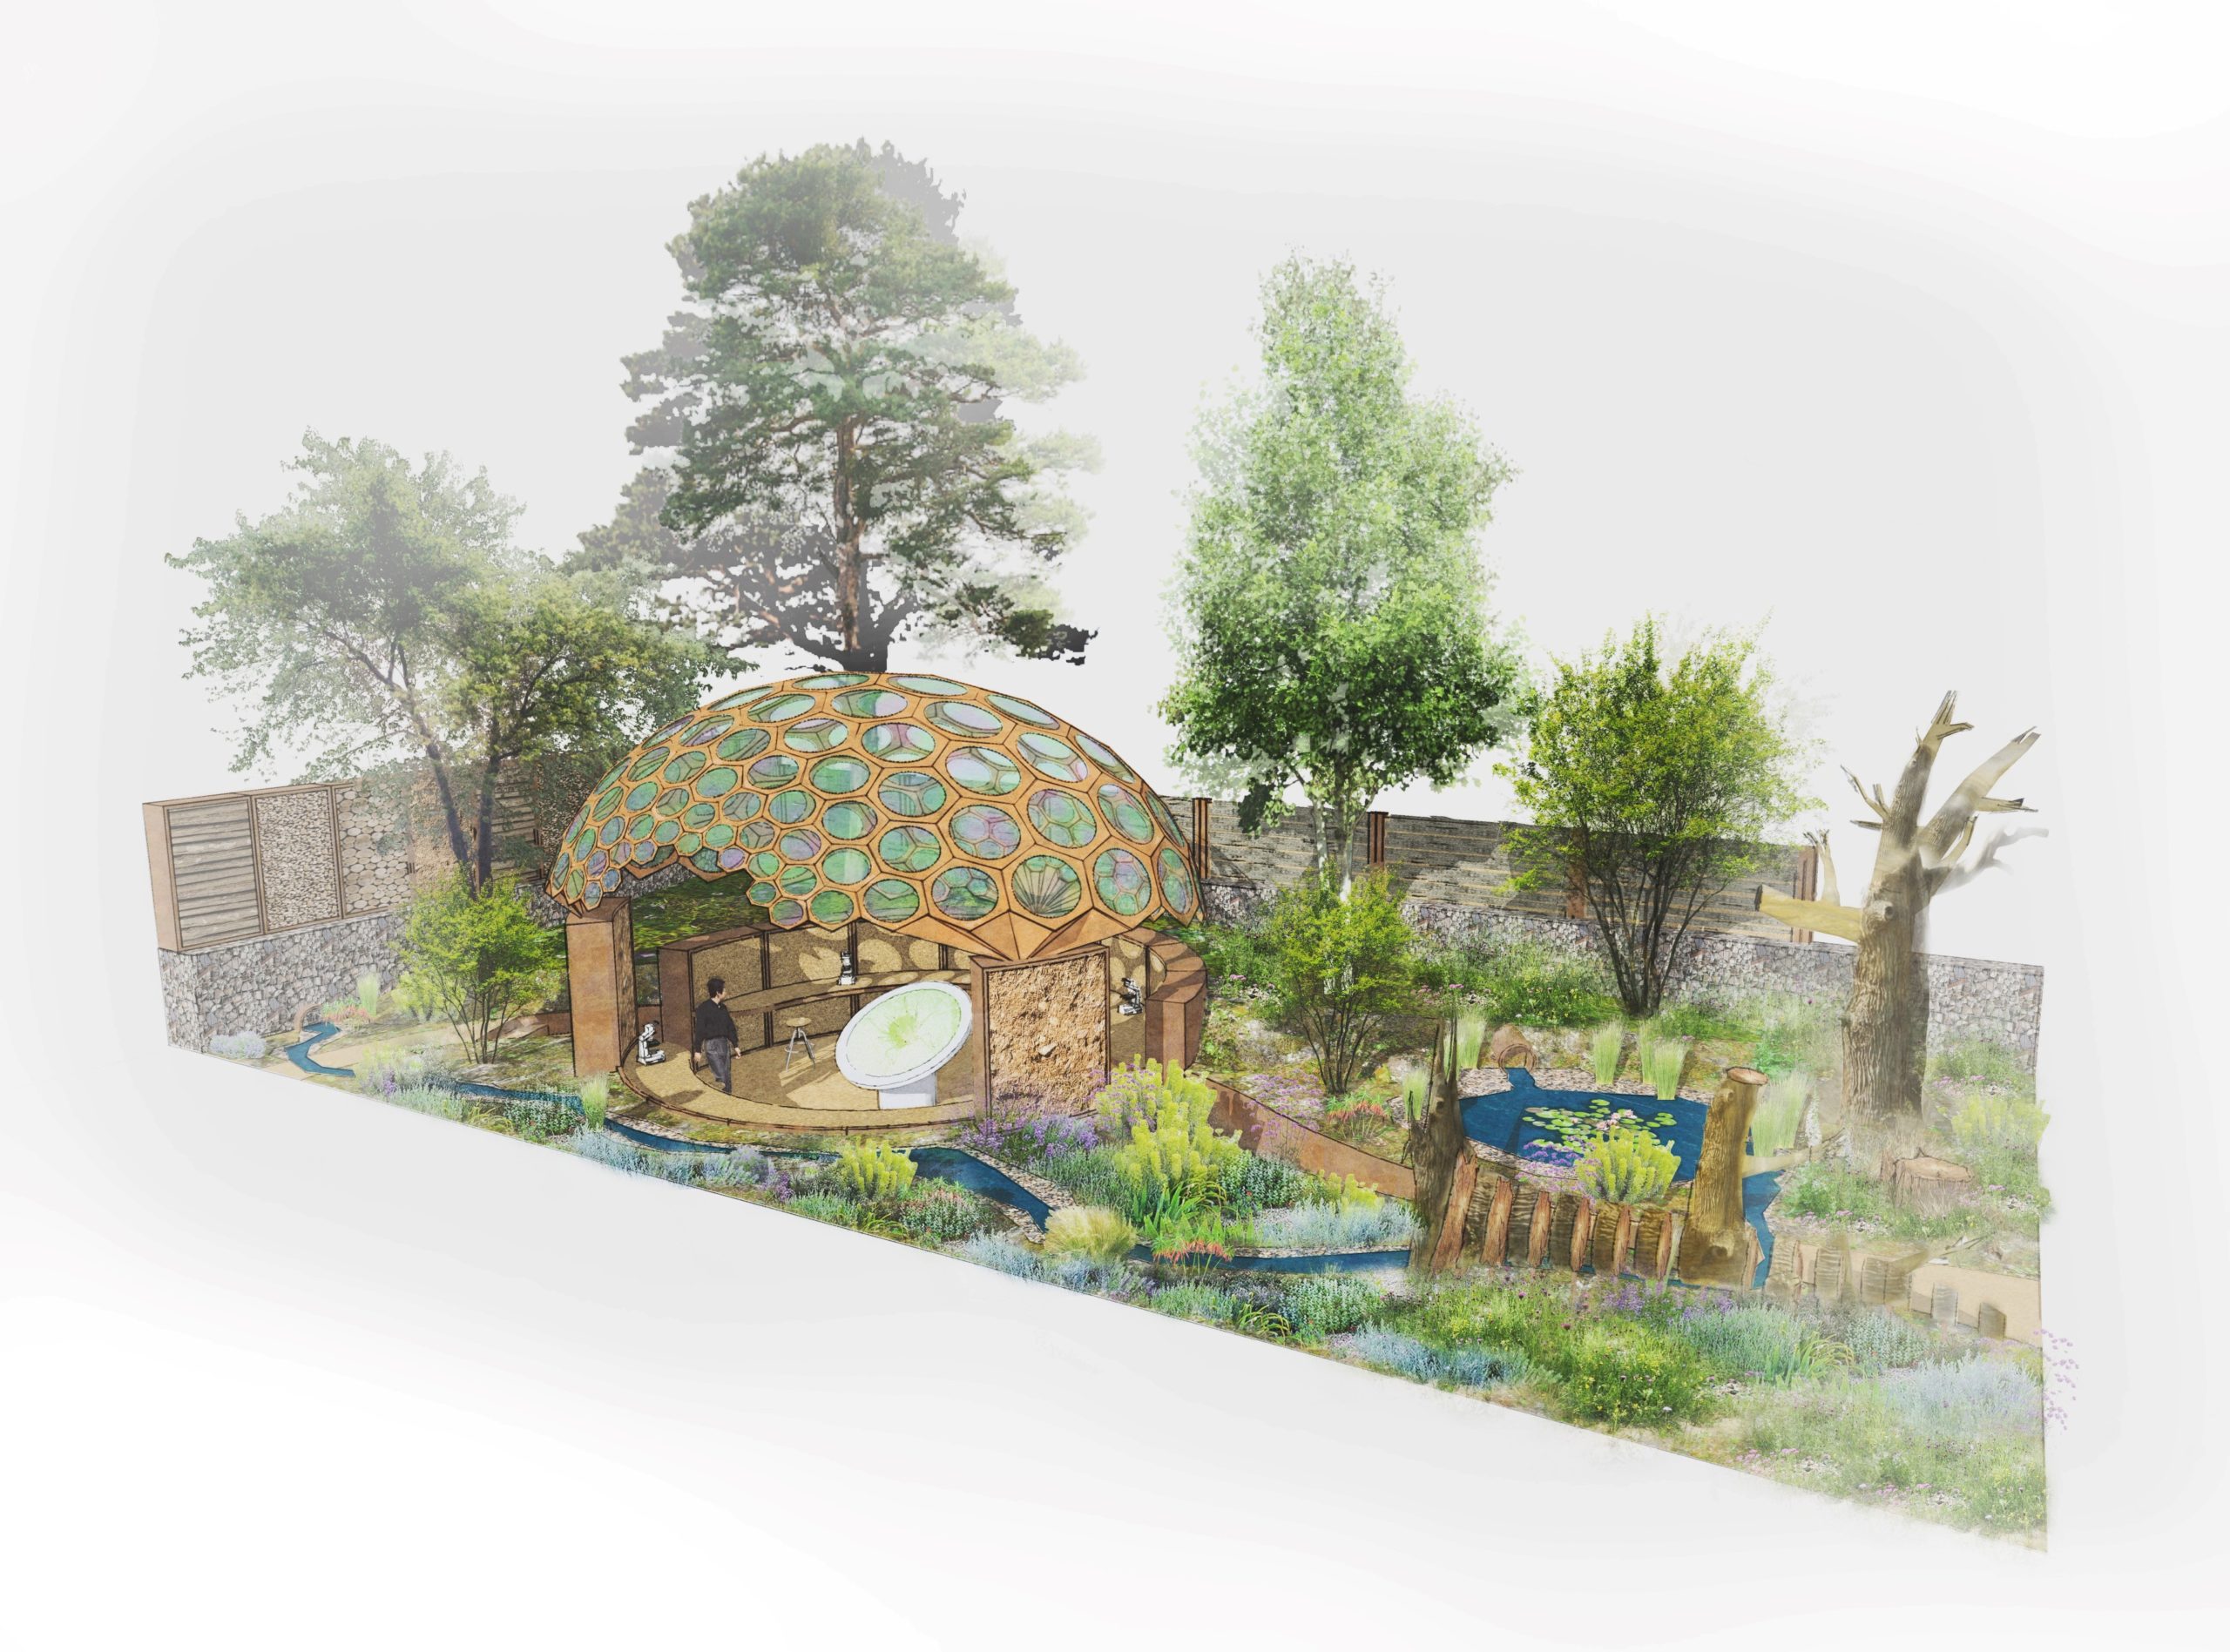 Image showing an artist's impression of the Royal Entomological Society Garden, which features large, mature trees, a wide range of flowering plants and foliage, a series of small ponds and waterways and a large domed structure, that has been designed to resemble a compound insect's eye and that will provide laboratory space for insect science to take place at the show.